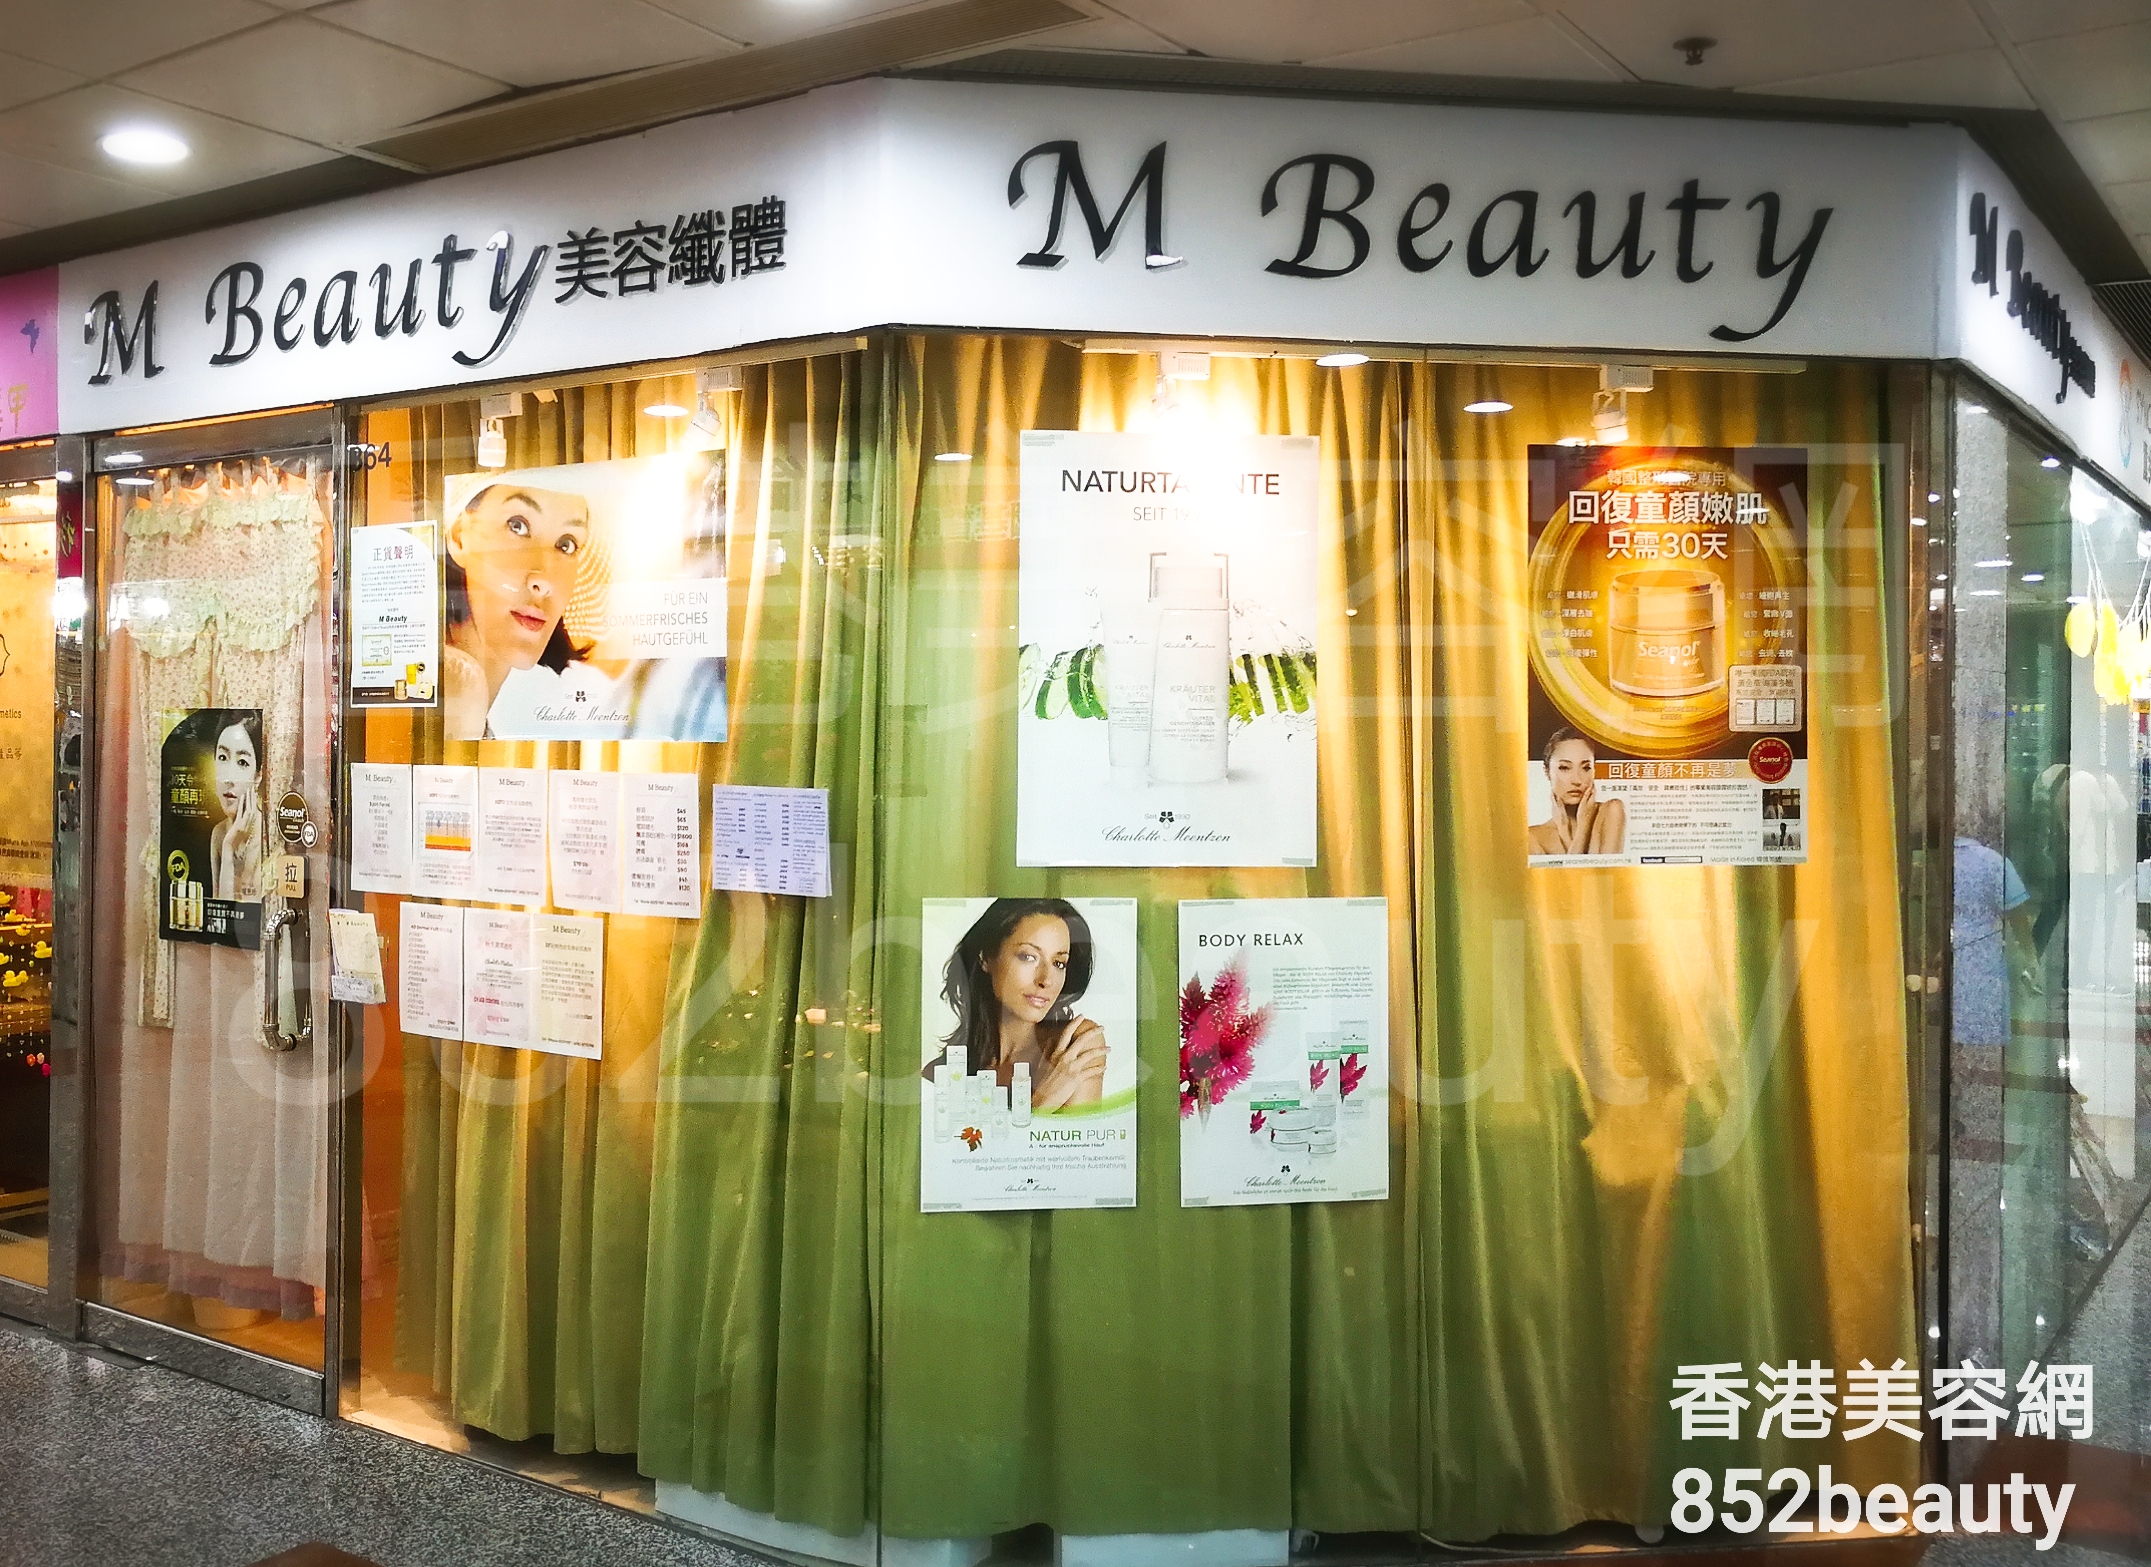 Hand and foot care: M Beauty